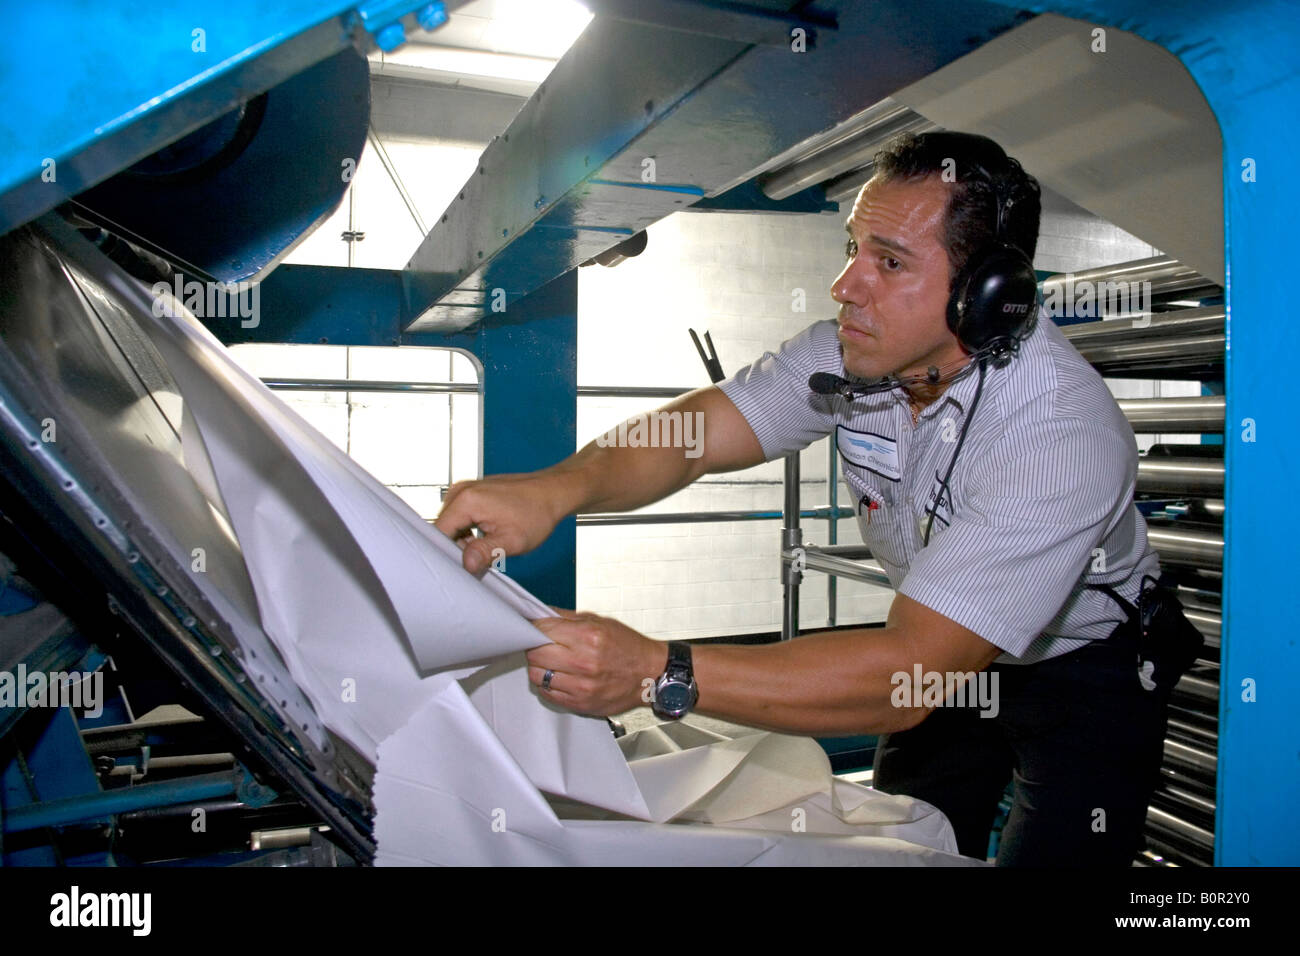 Worker clearing a torn web from the rotary printing press at the Houston Chronicle in Houston Texas Stock Photo